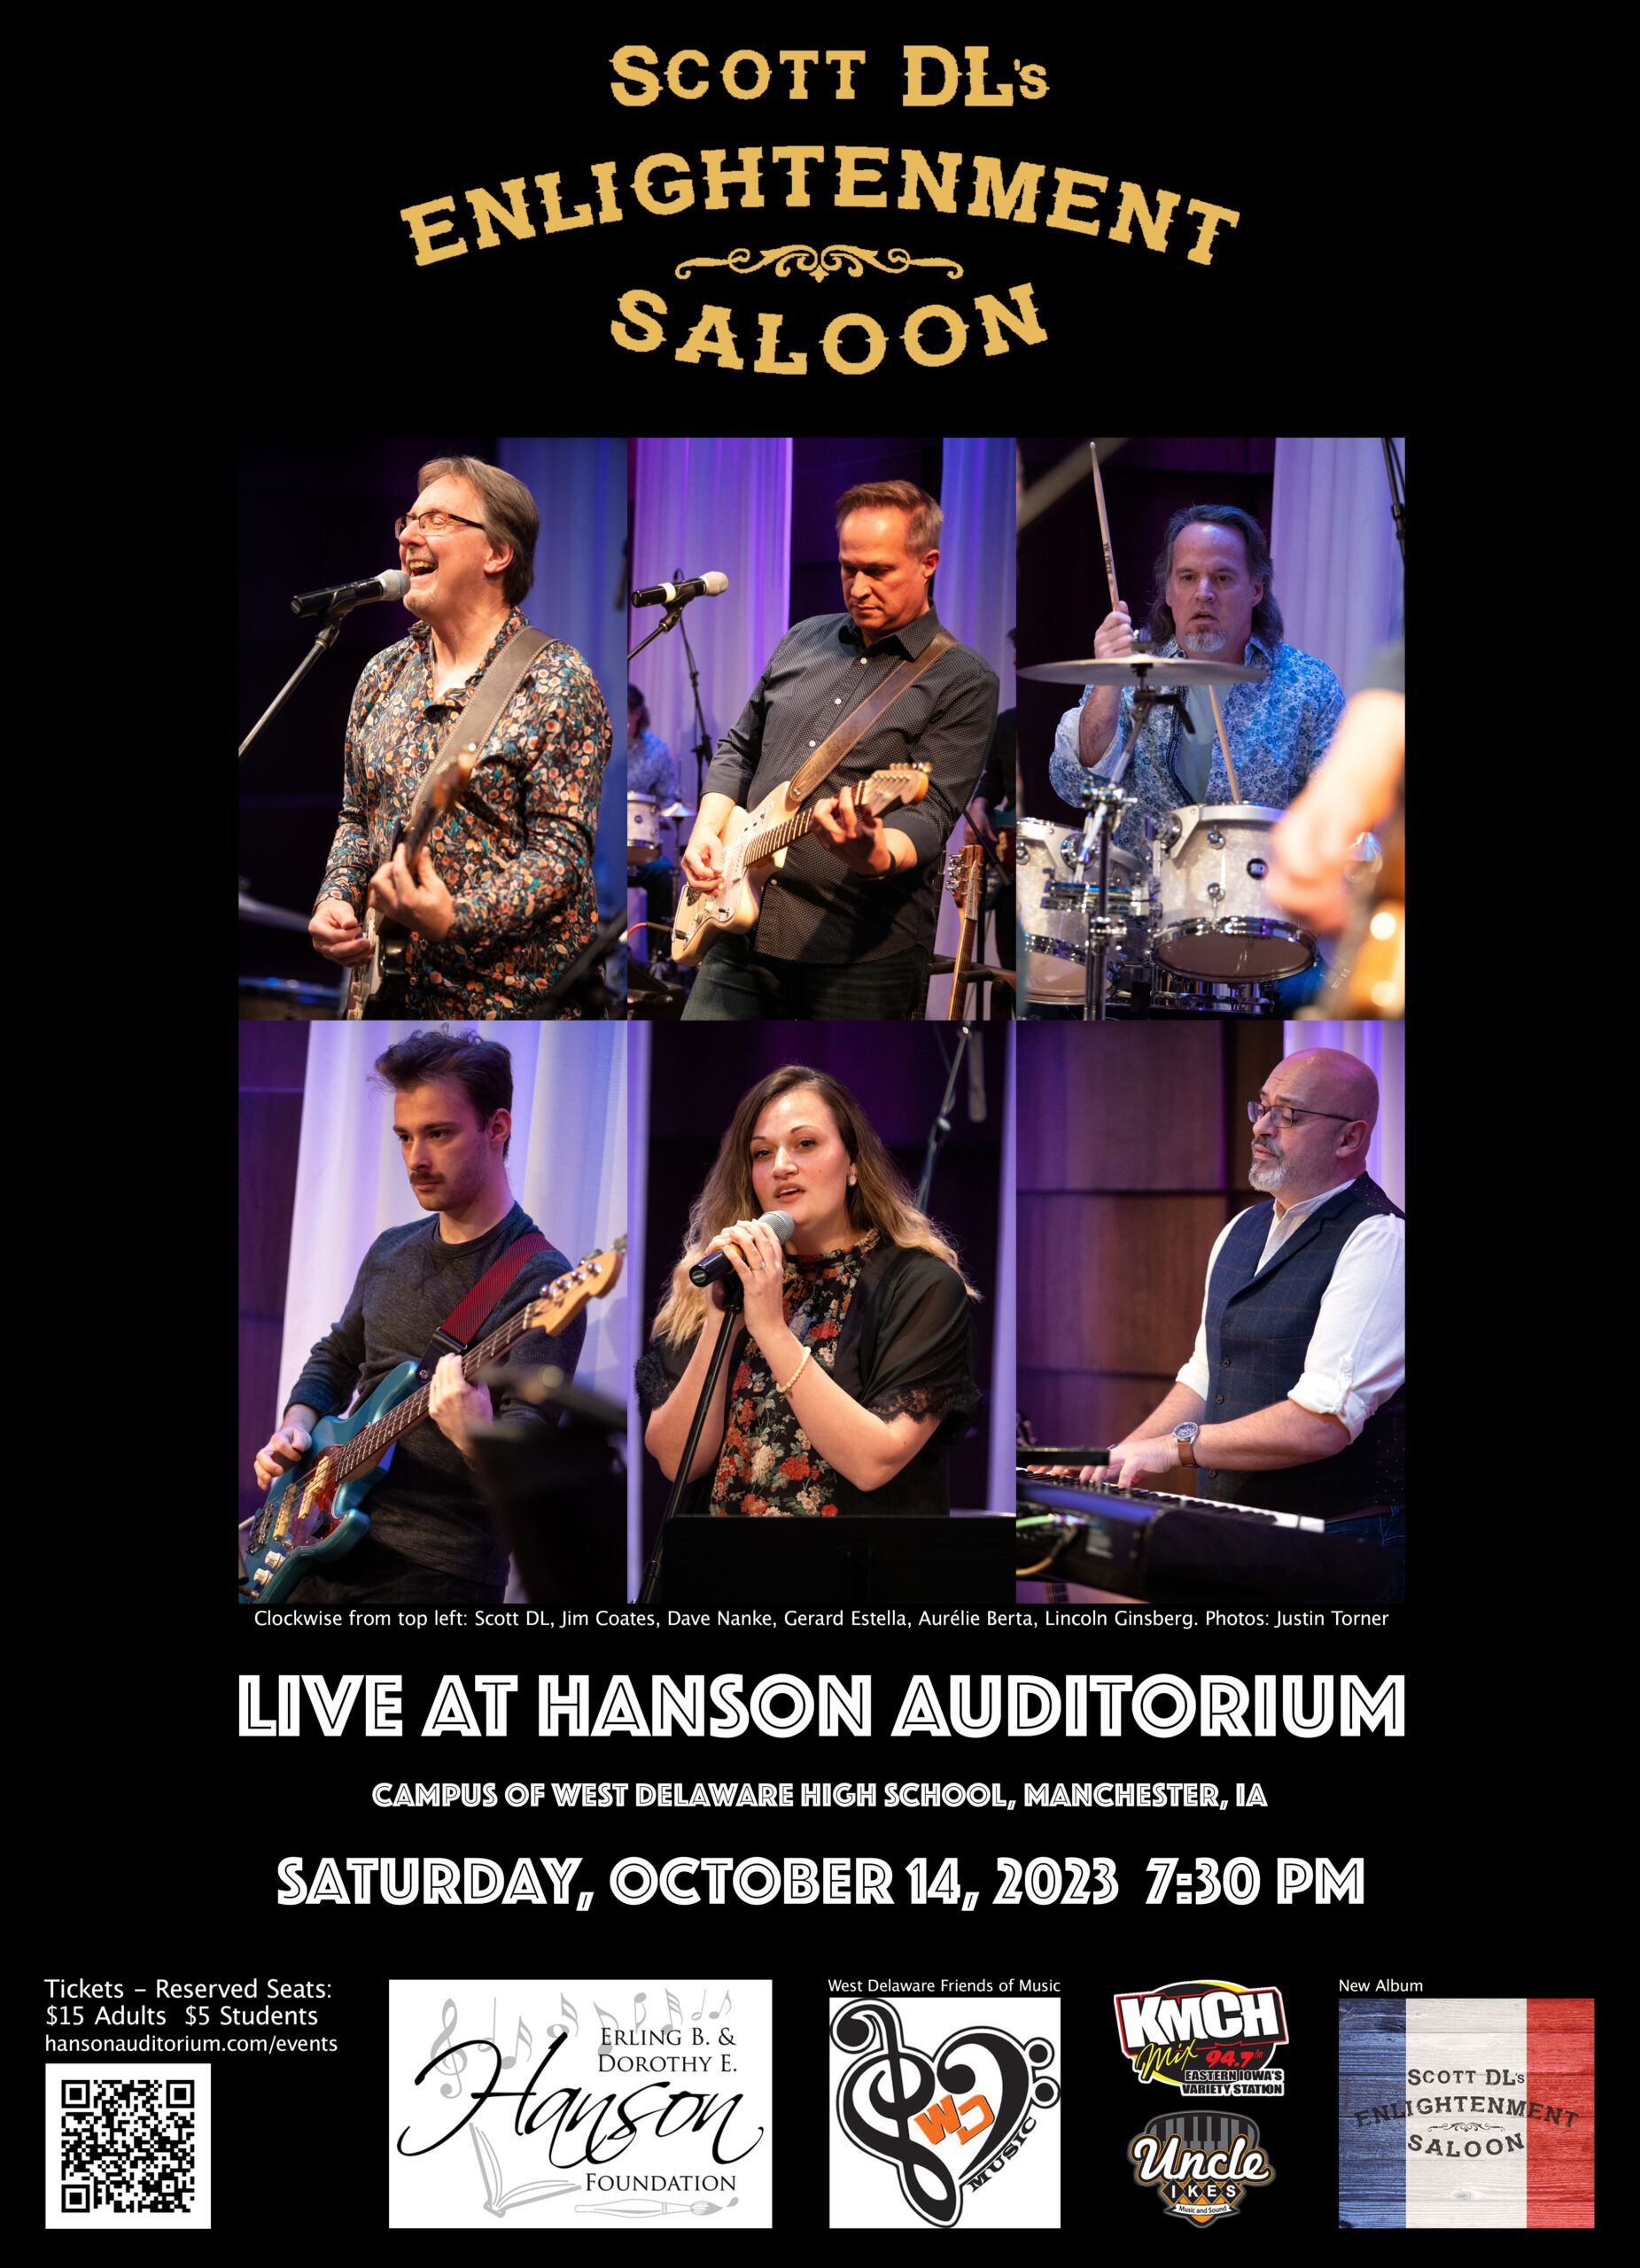 Scott DL’s Enlightenment Saloon to perform at Hanson Auditorium in Manchester, IA, October 14, 2023